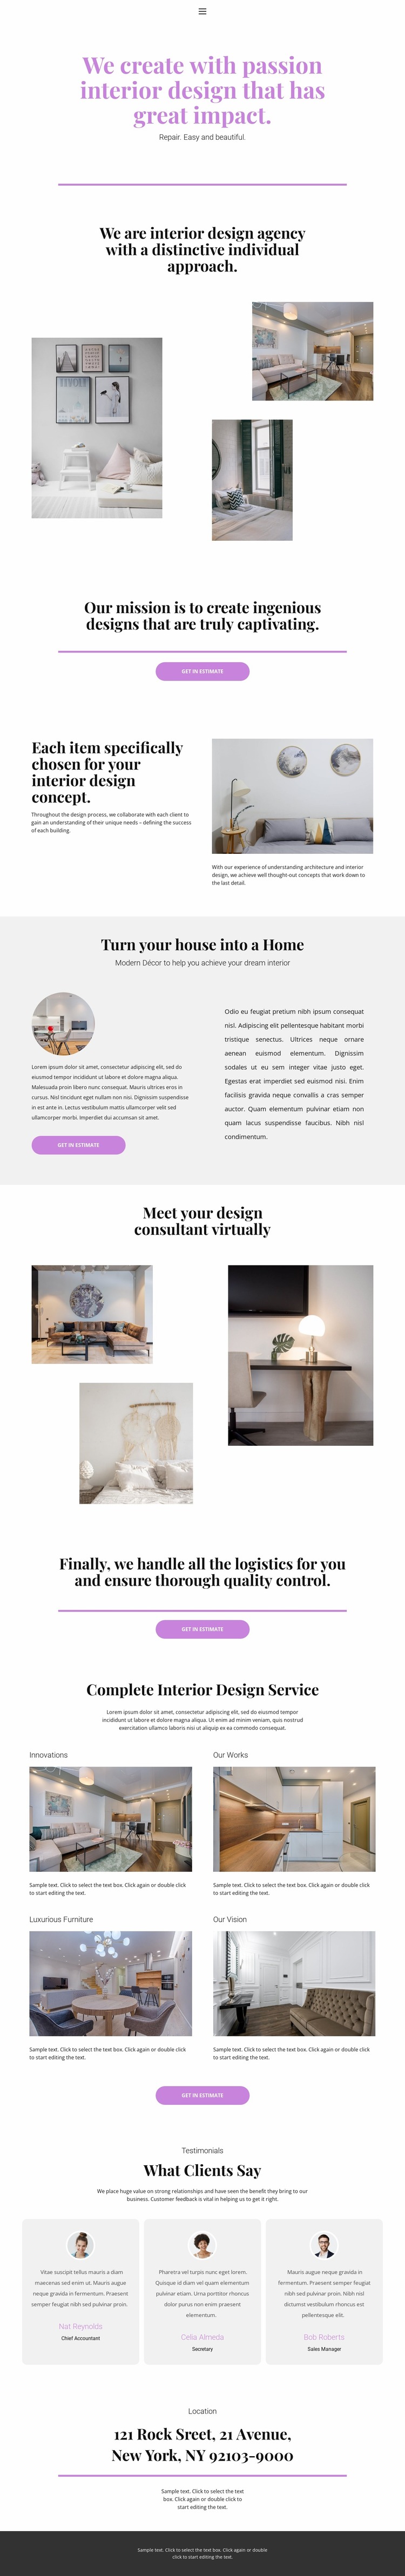 Choice of design for the house Website Mockup